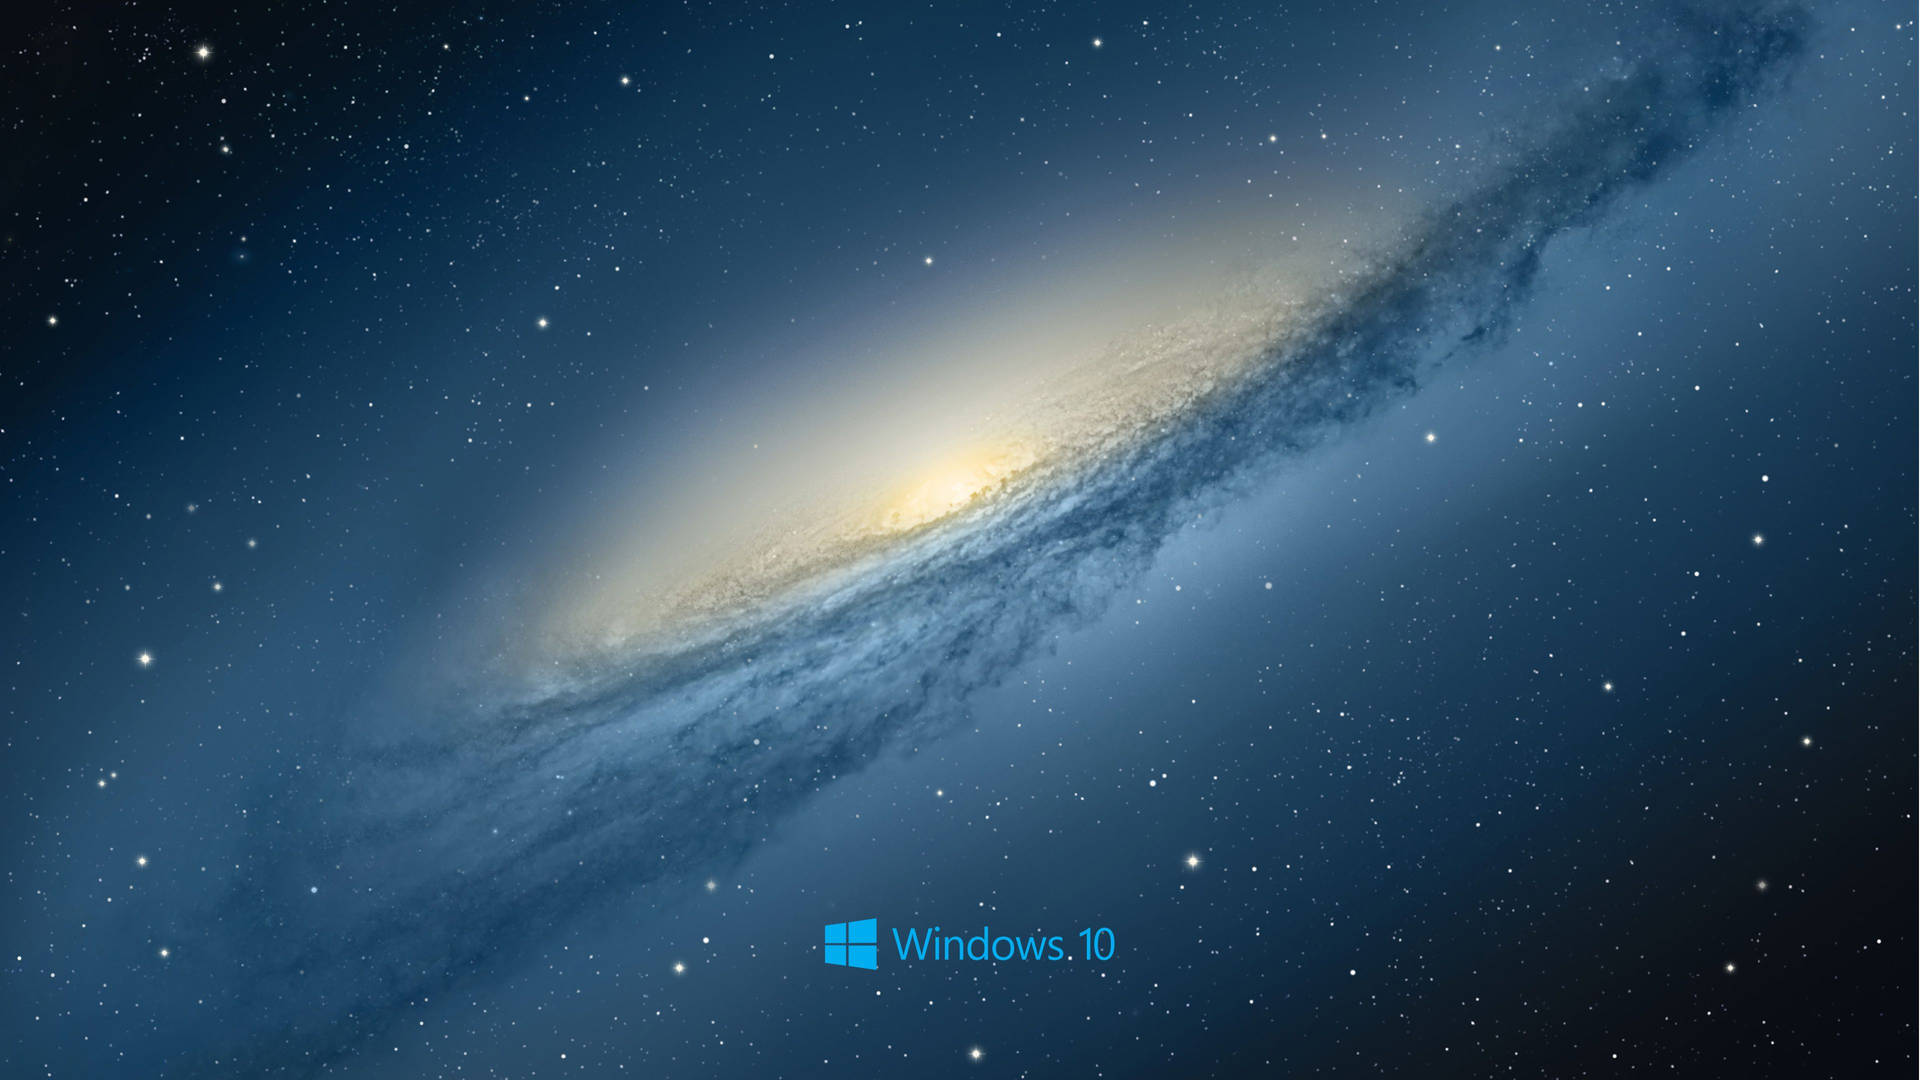 Windows 10 3840X2160 Wallpaper and Background Image